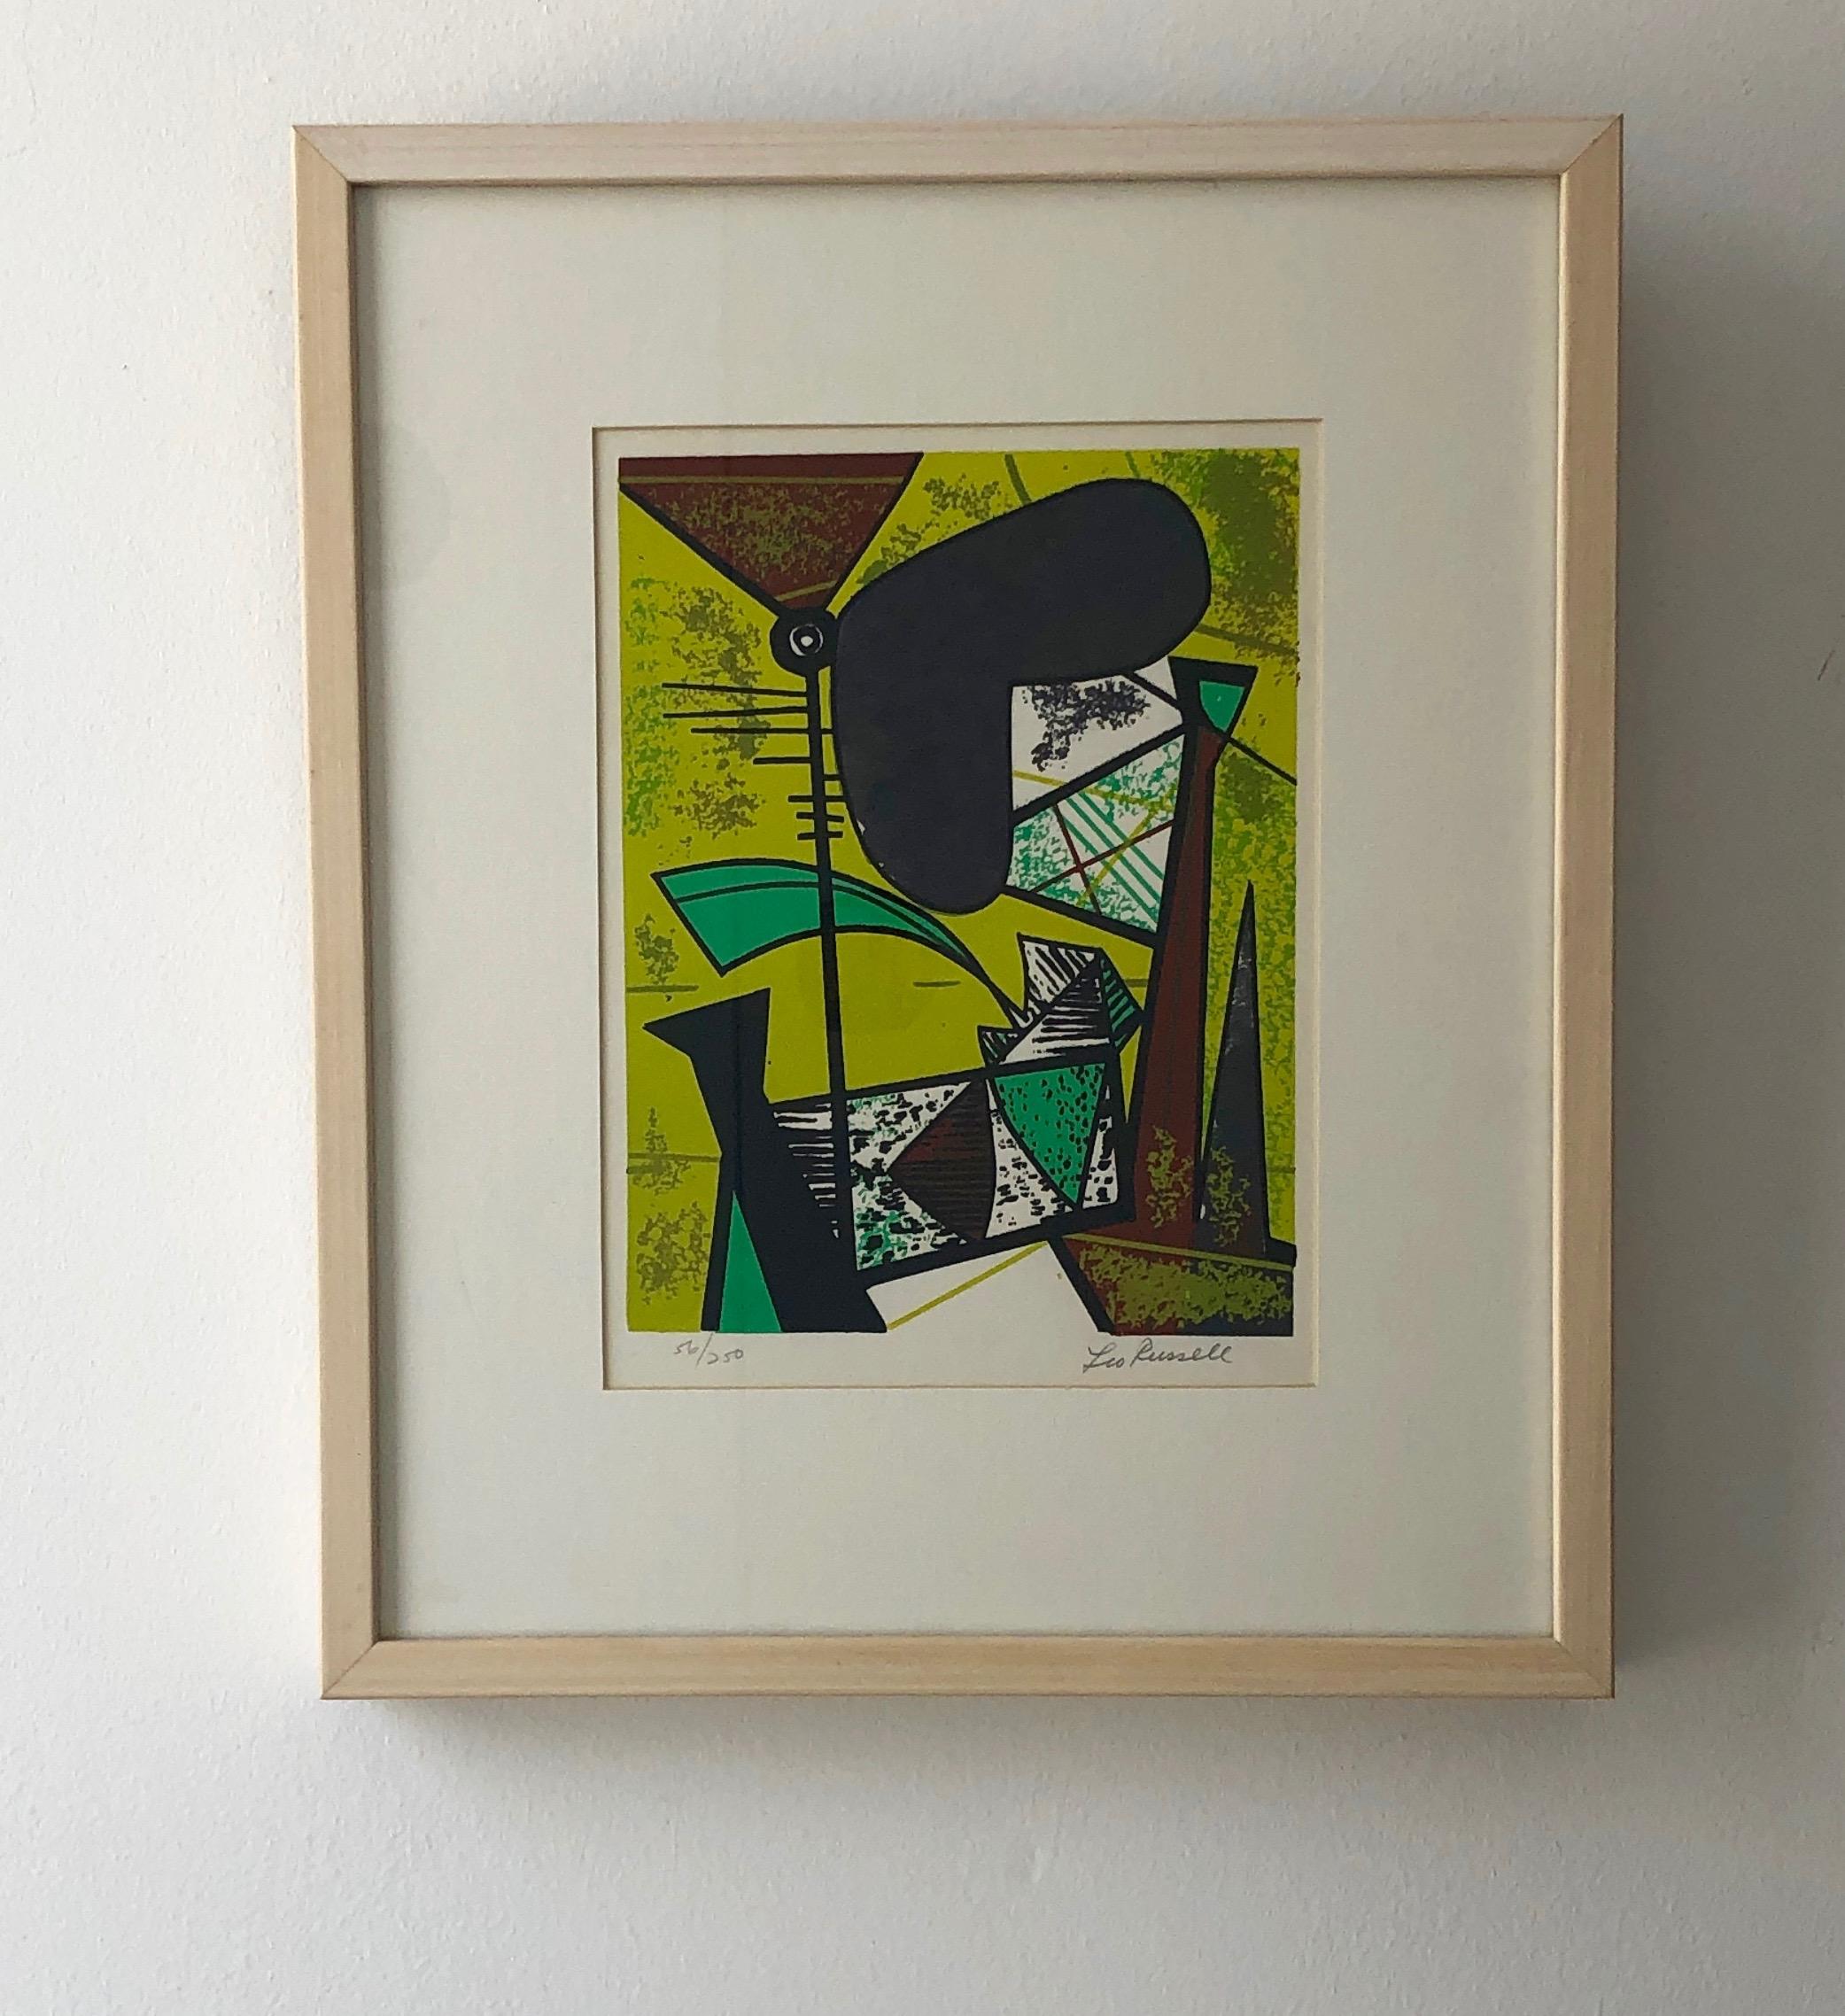 Offered is a pencil signed and numbered 55/250 Leo Russell Modernist abstract graphic print in bright Chartreuse green, mint green, white, gray black and brick red. The piece is framed in blond wood and in under Plexiglass. Even though this piece is